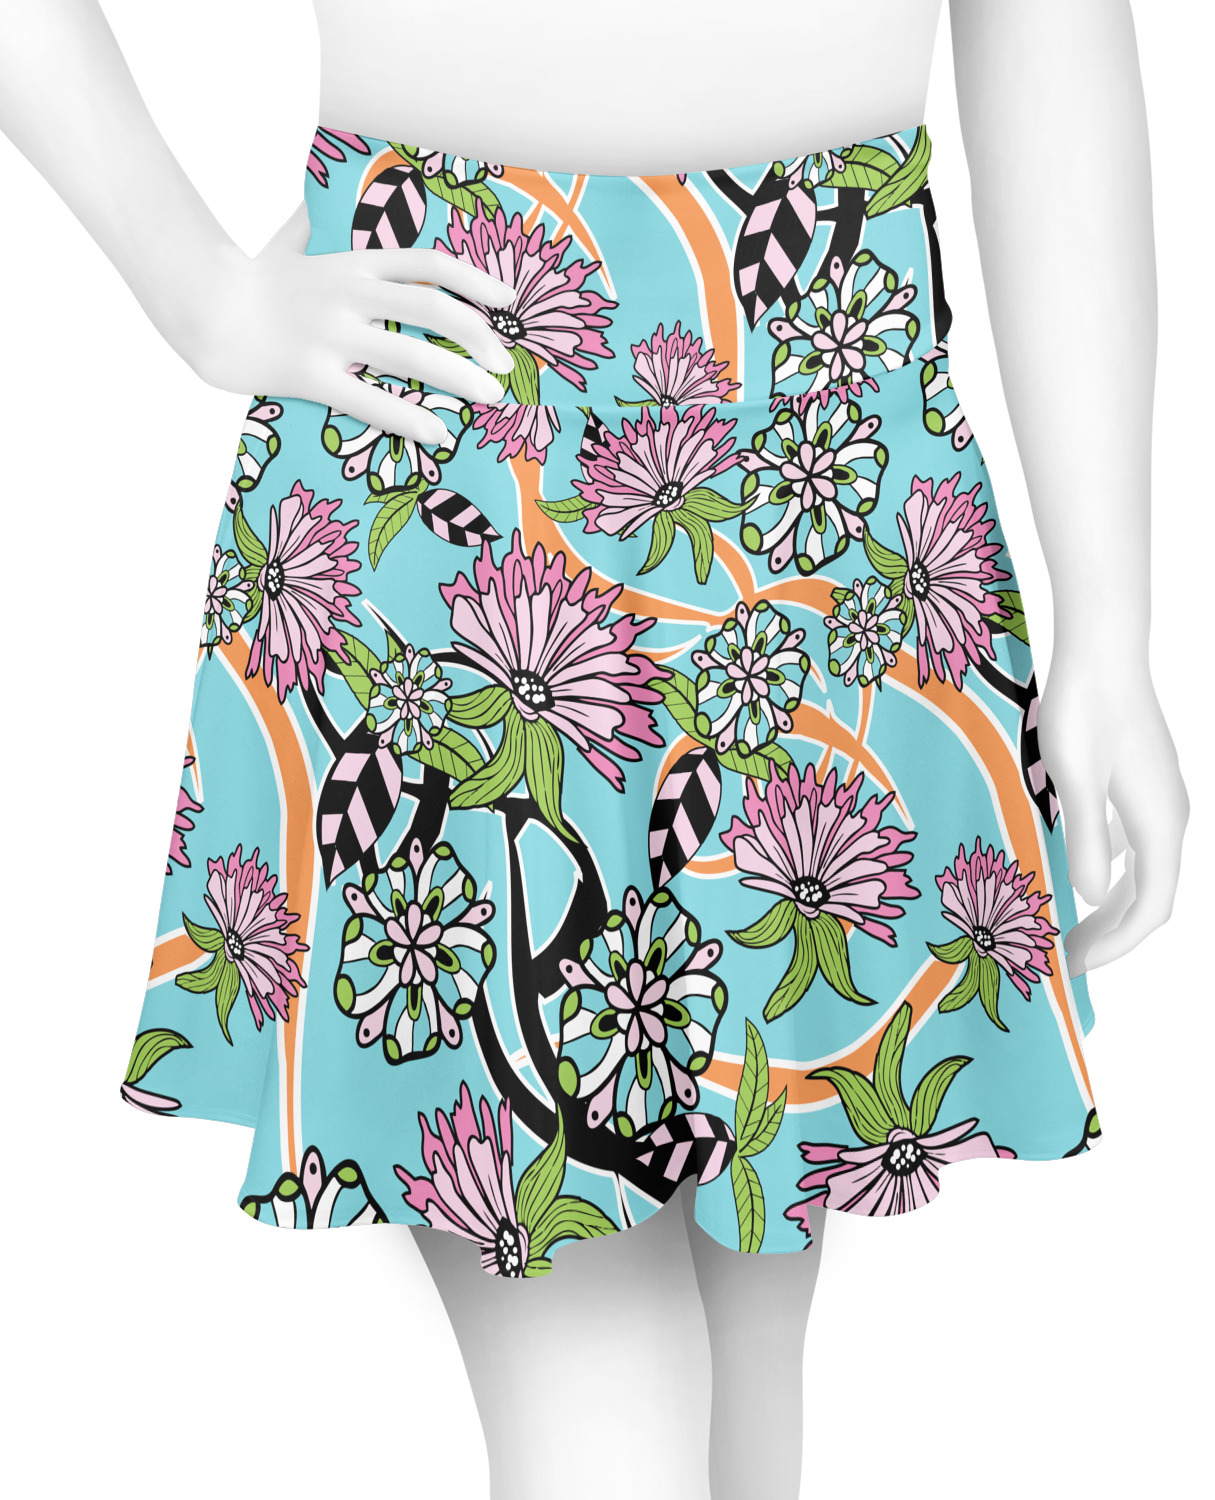 Summer Flowers Skater Skirt - Small (Personalized) - YouCustomizeIt